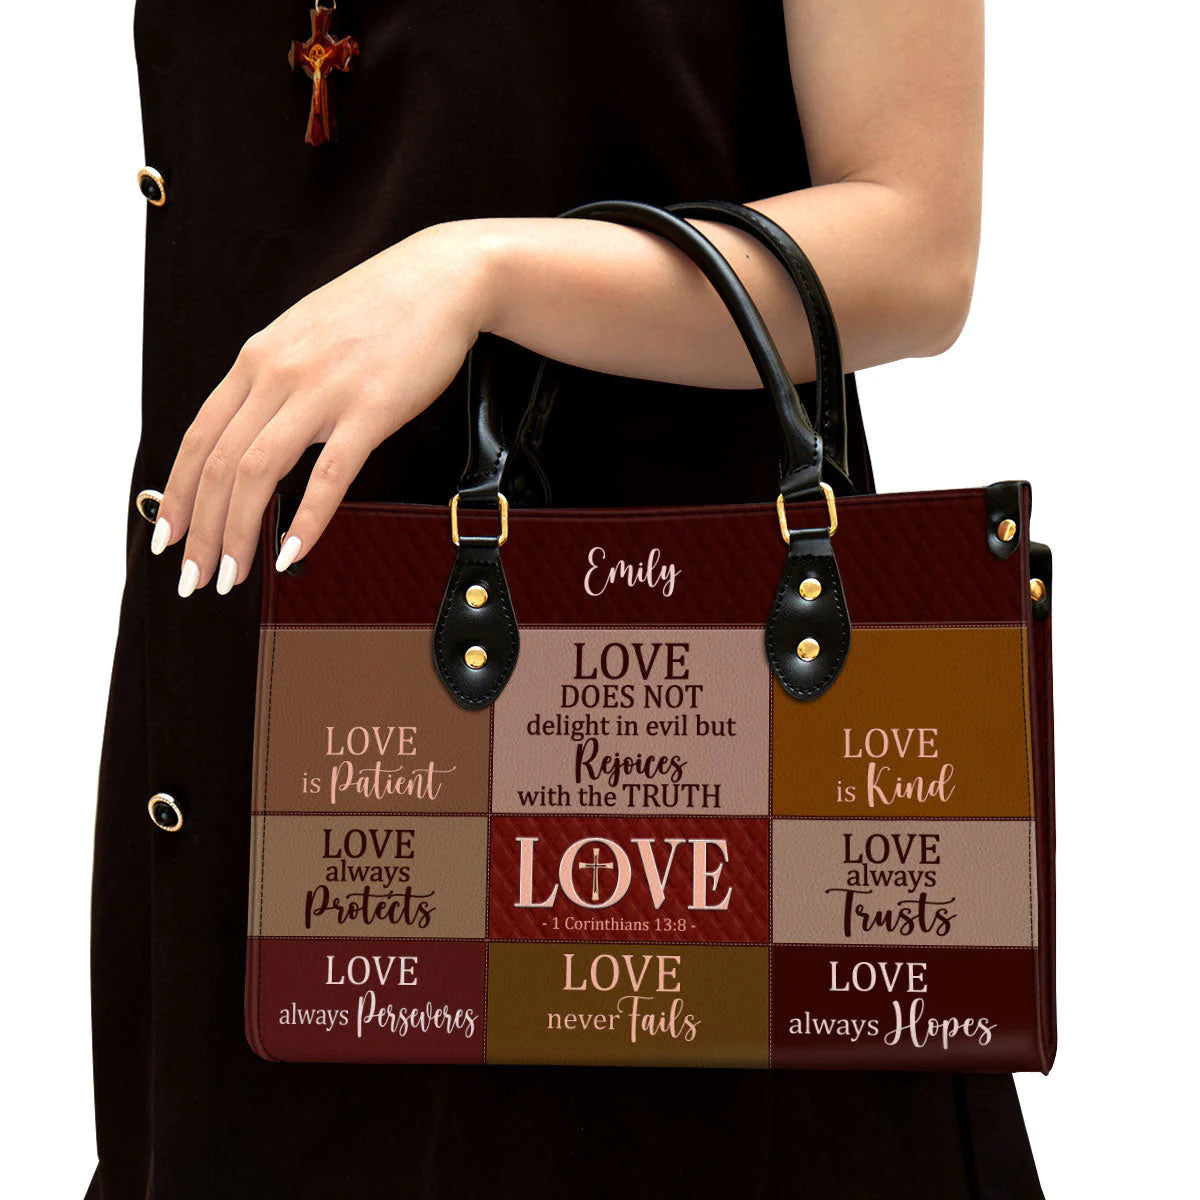 Christianartbag Handbag, Love Is Patient, Personalized Gifts, Gifts for Women, Christmas Gift. - Christian Art Bag